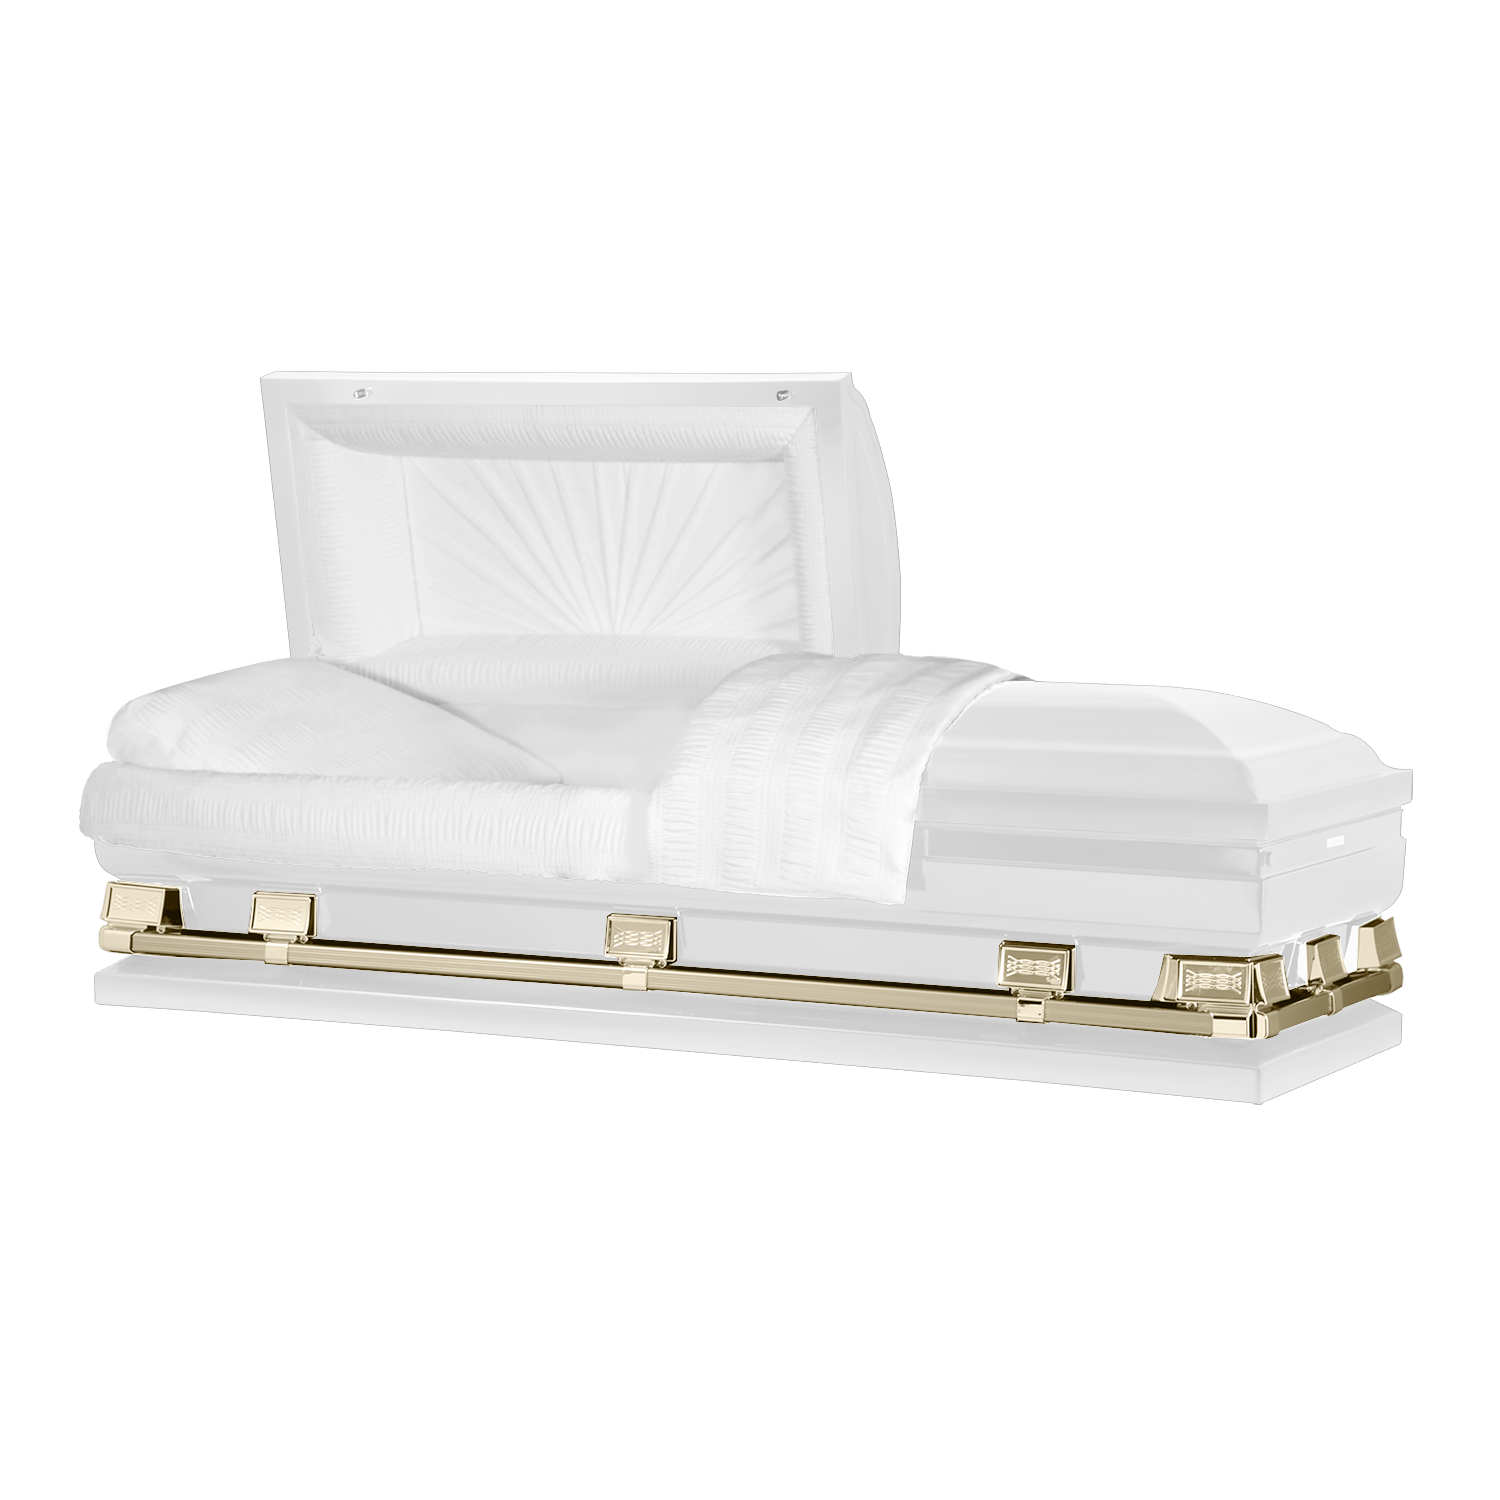 Load image into Gallery viewer, Atlas XL | White and Gold Steel Oversize Casket with White Interior - Titan Casket
